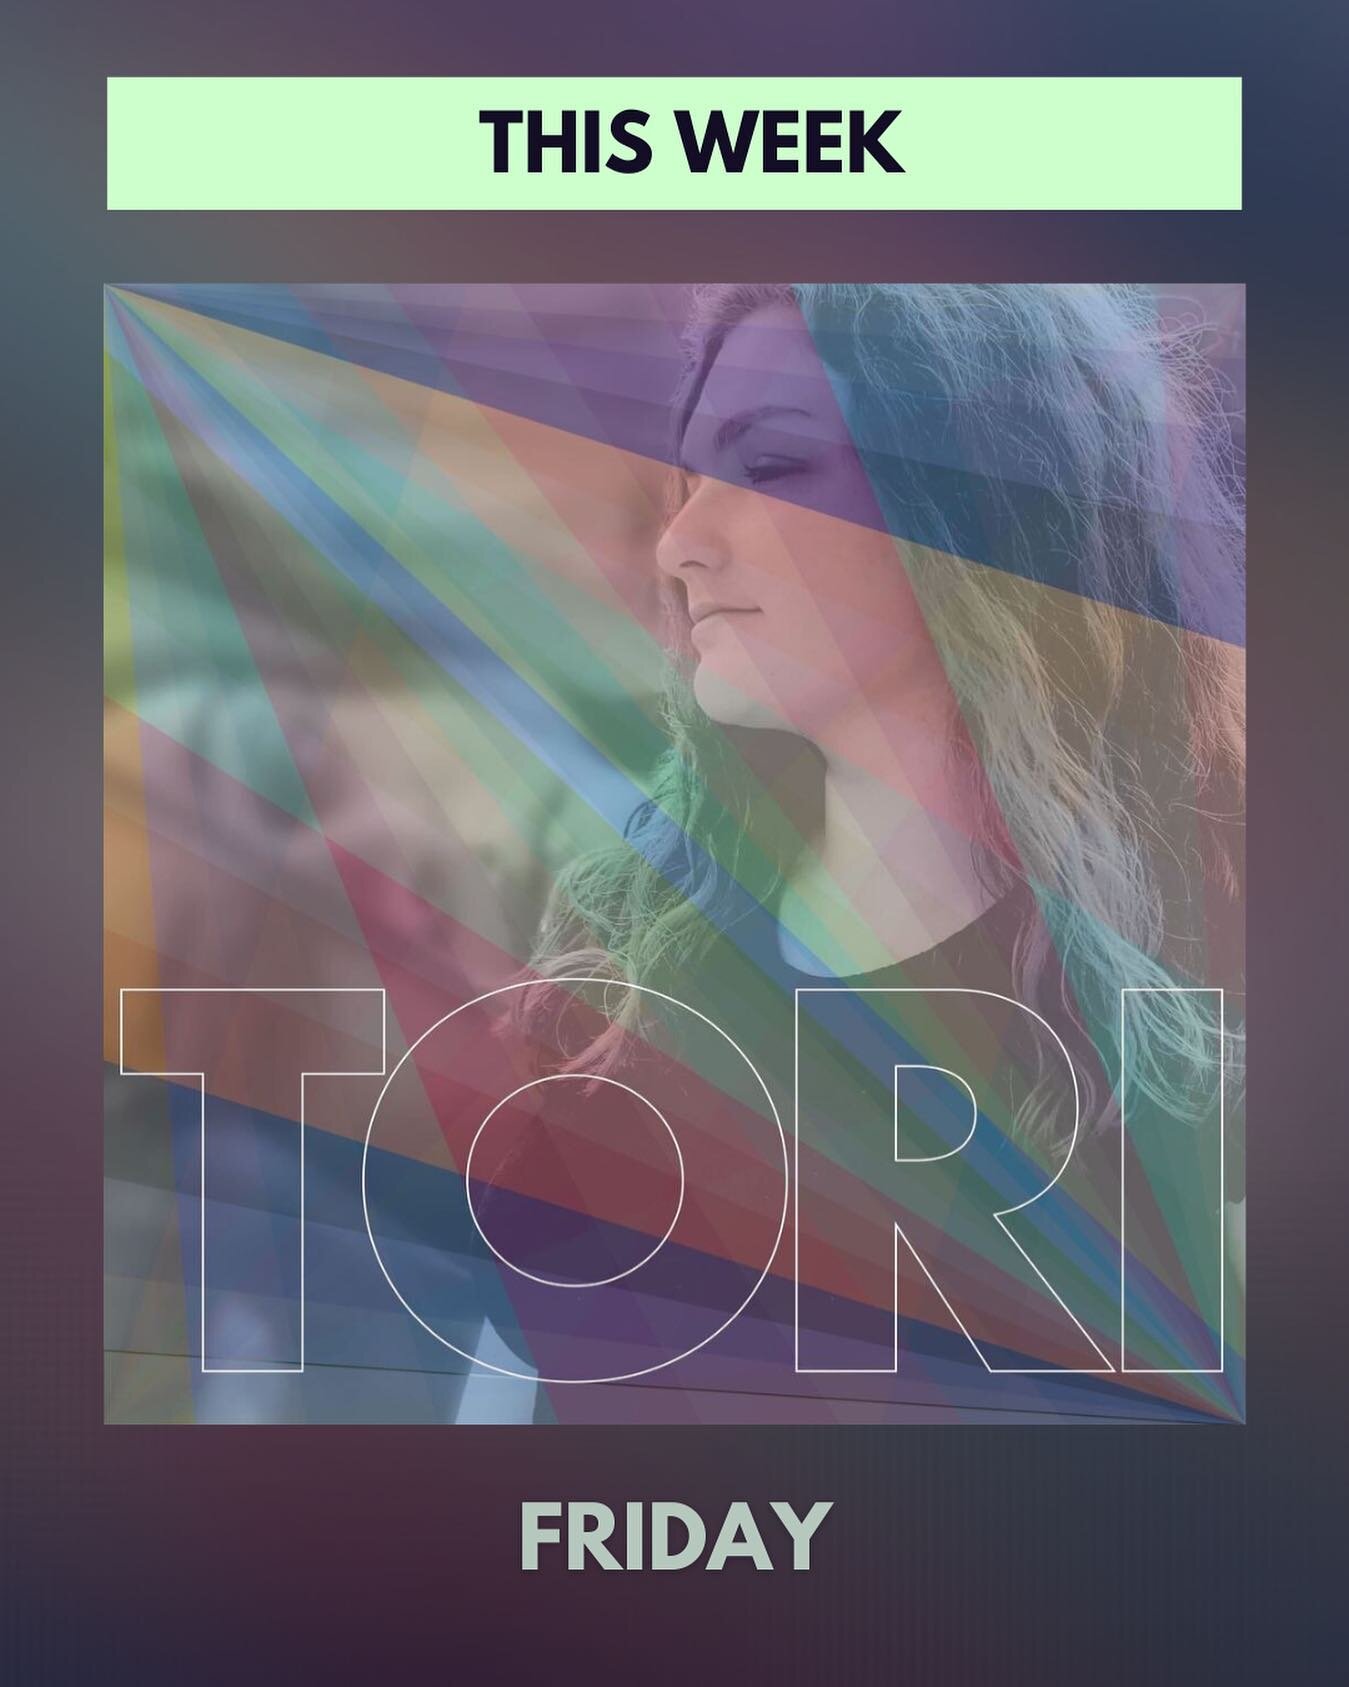 UP NEXT: we have @tori_end_of_story releasing her single &ldquo;Let Myself Go&rdquo; this Friday 2/12 ✨ get ready!!